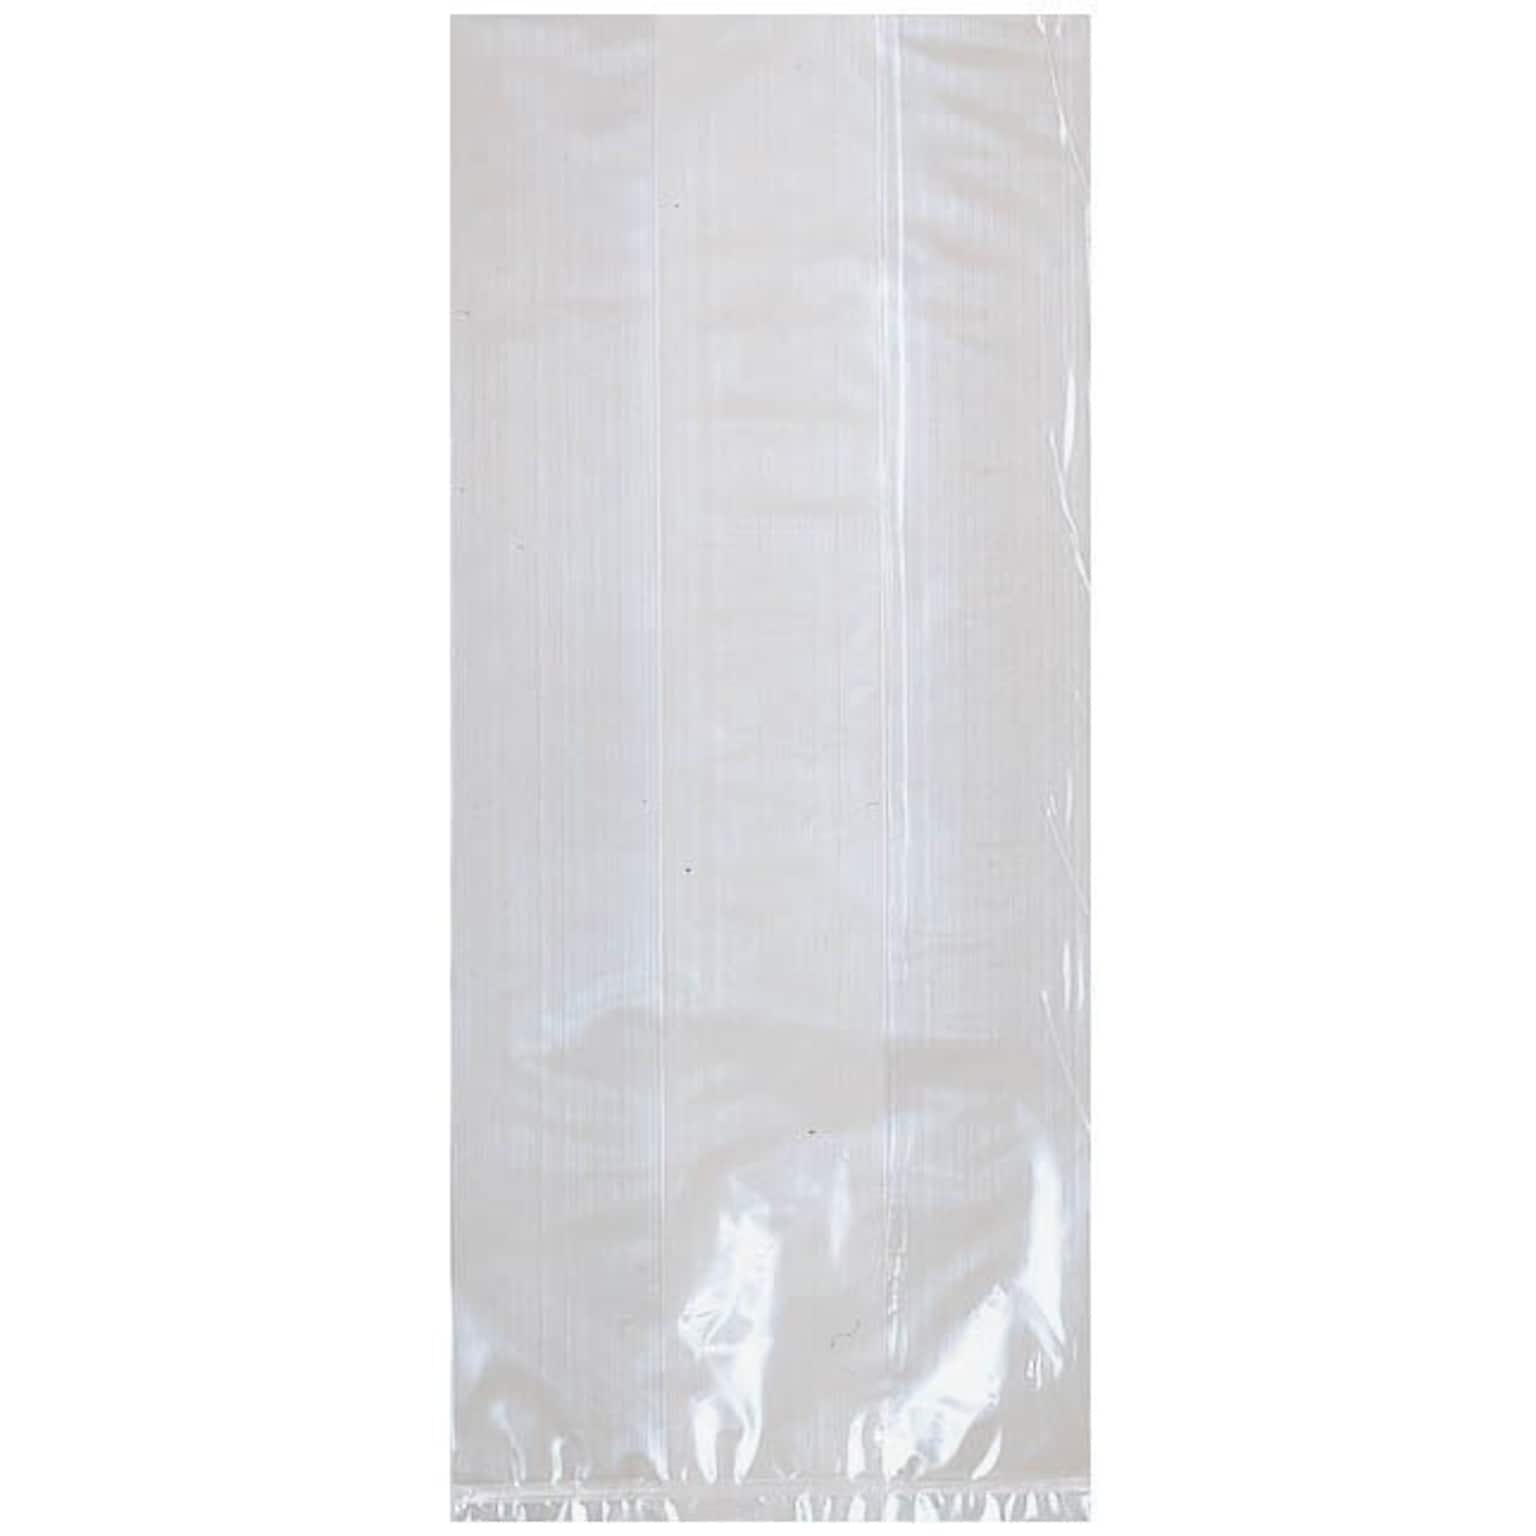 Amscan Cello Party Bag, 9.5 x 4, Clear, 12/Pack, 25 Bags/Pack (37640)